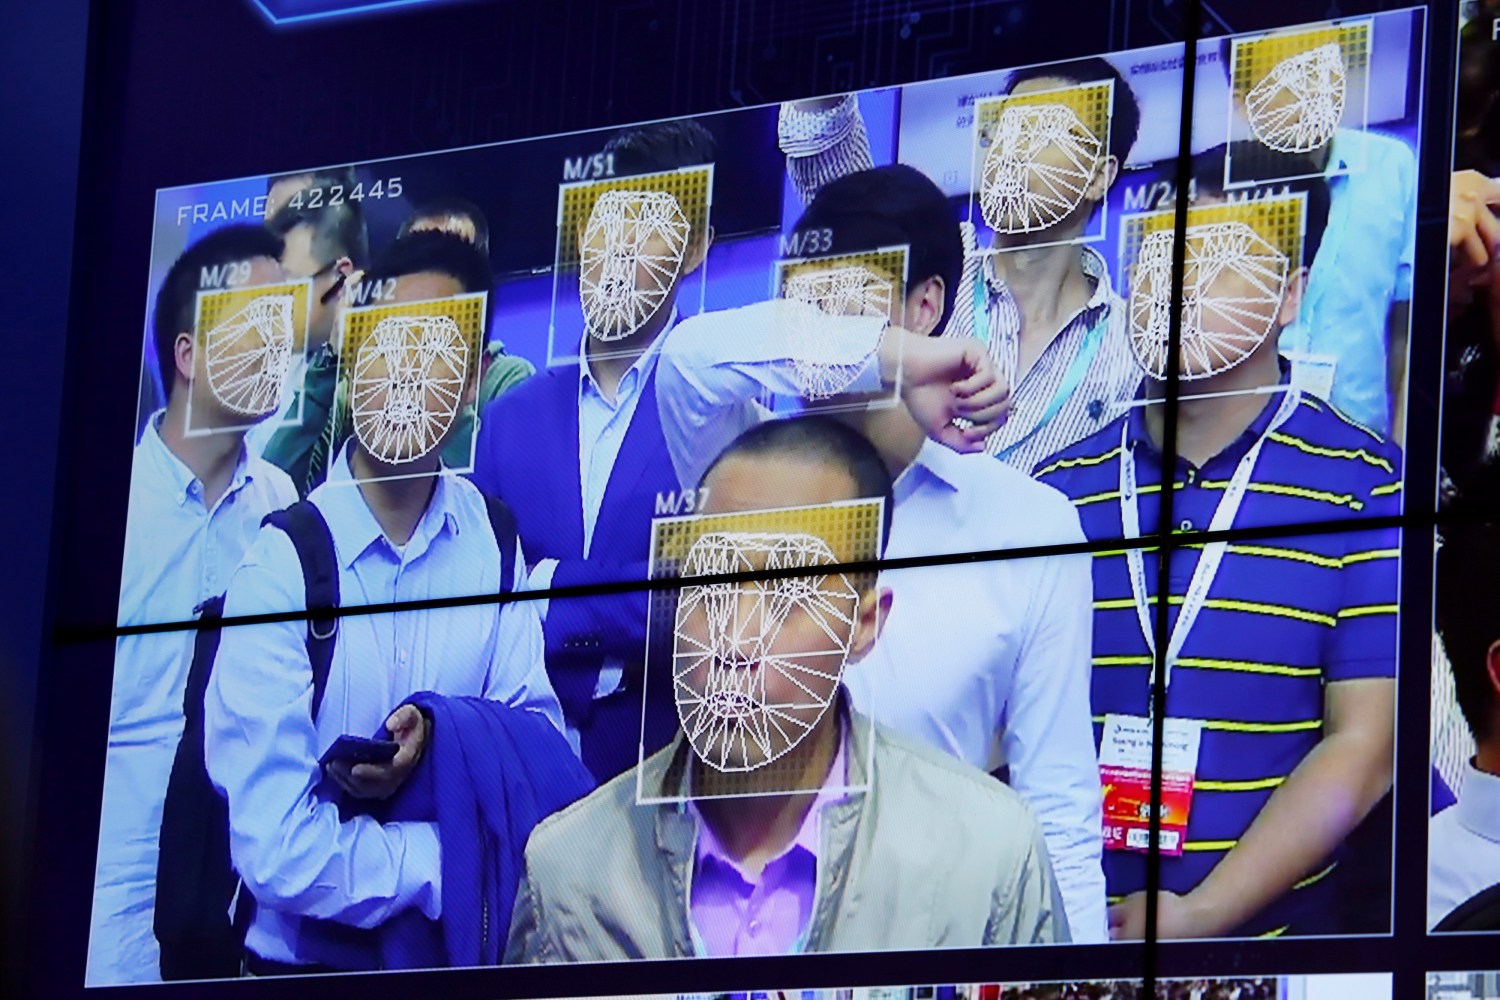 Visitors experience facial recognition technology at Face++ booth during the China Public Security Expo in Shenzhen, China October 30, 2017. Picture taken October 30, 2017.     REUTERS/Bobby Yip - RC1A55461440